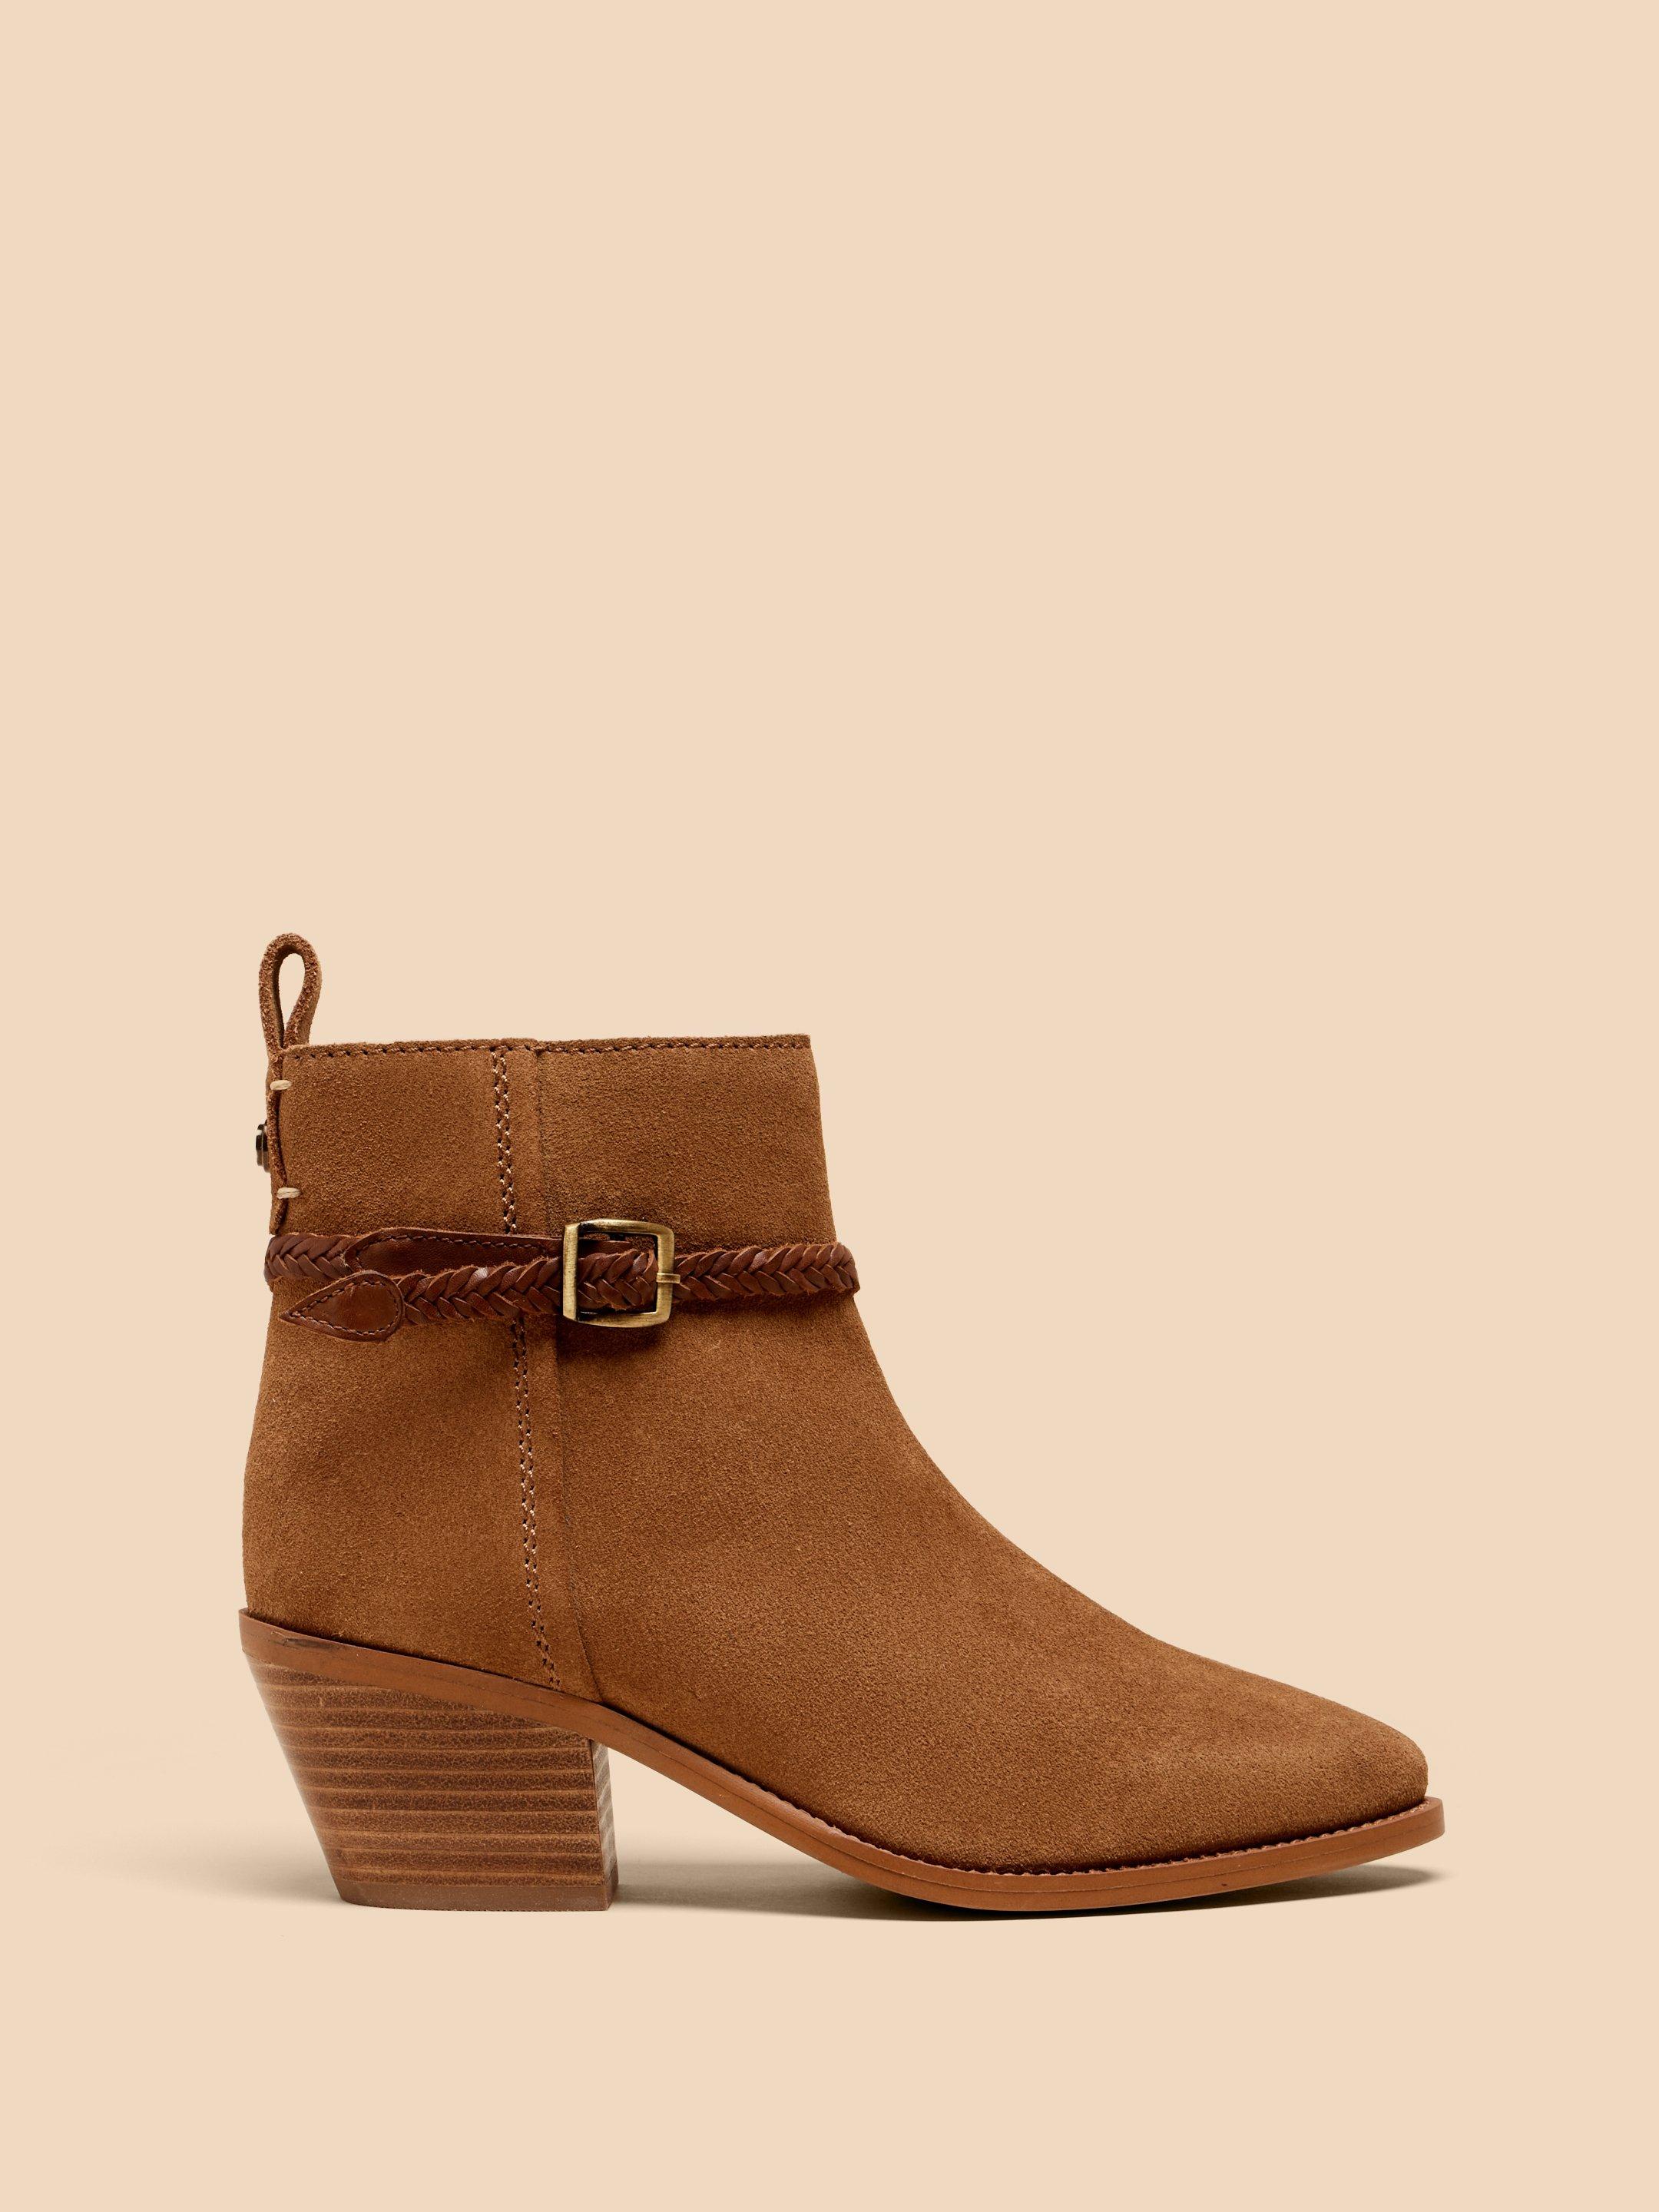 Peony Suede Plait Strap Boot